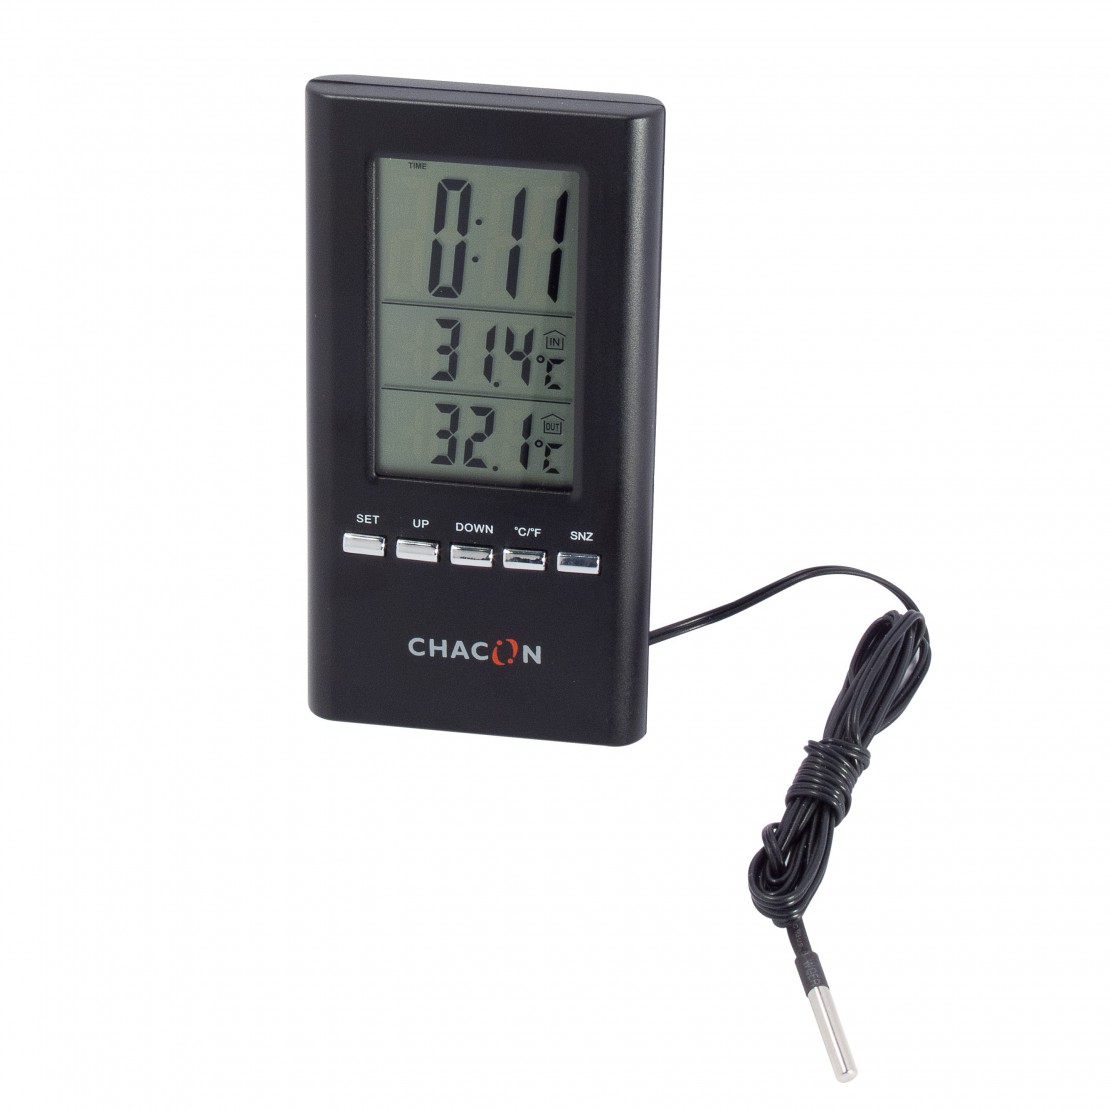 https://chacon.com/9083-large_default/wired-inside-outside-thermometer.jpg